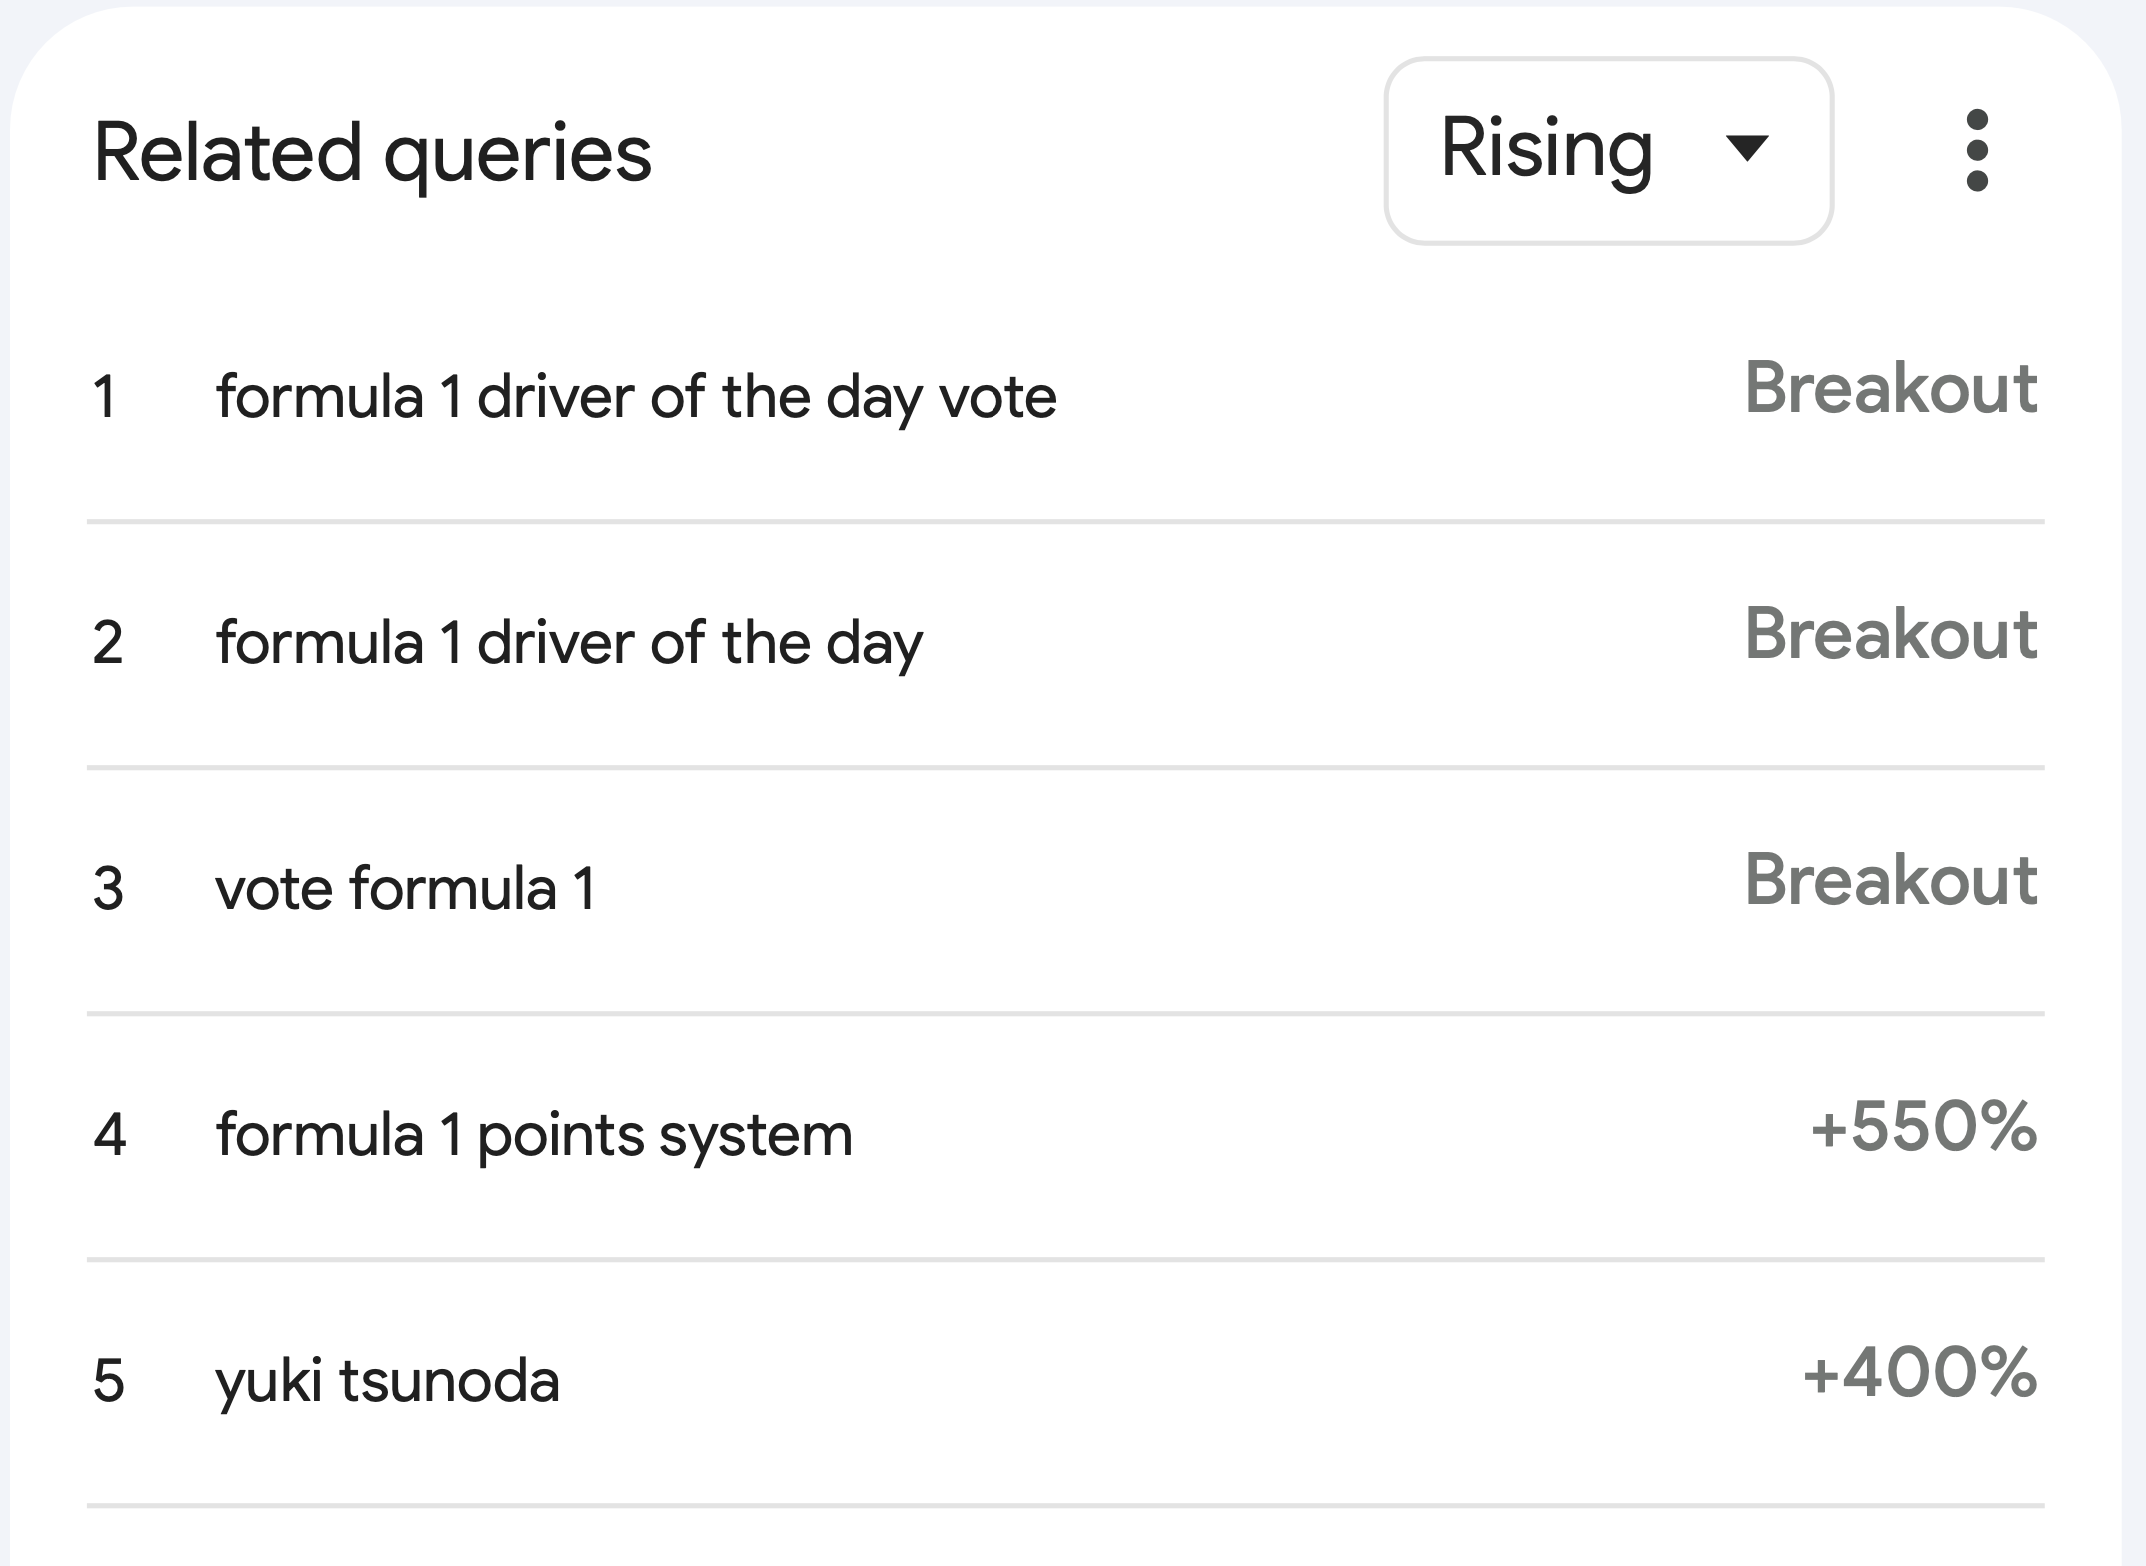 Figure 3. Top queries related to "formula 1." Screenshot from Google Trends.